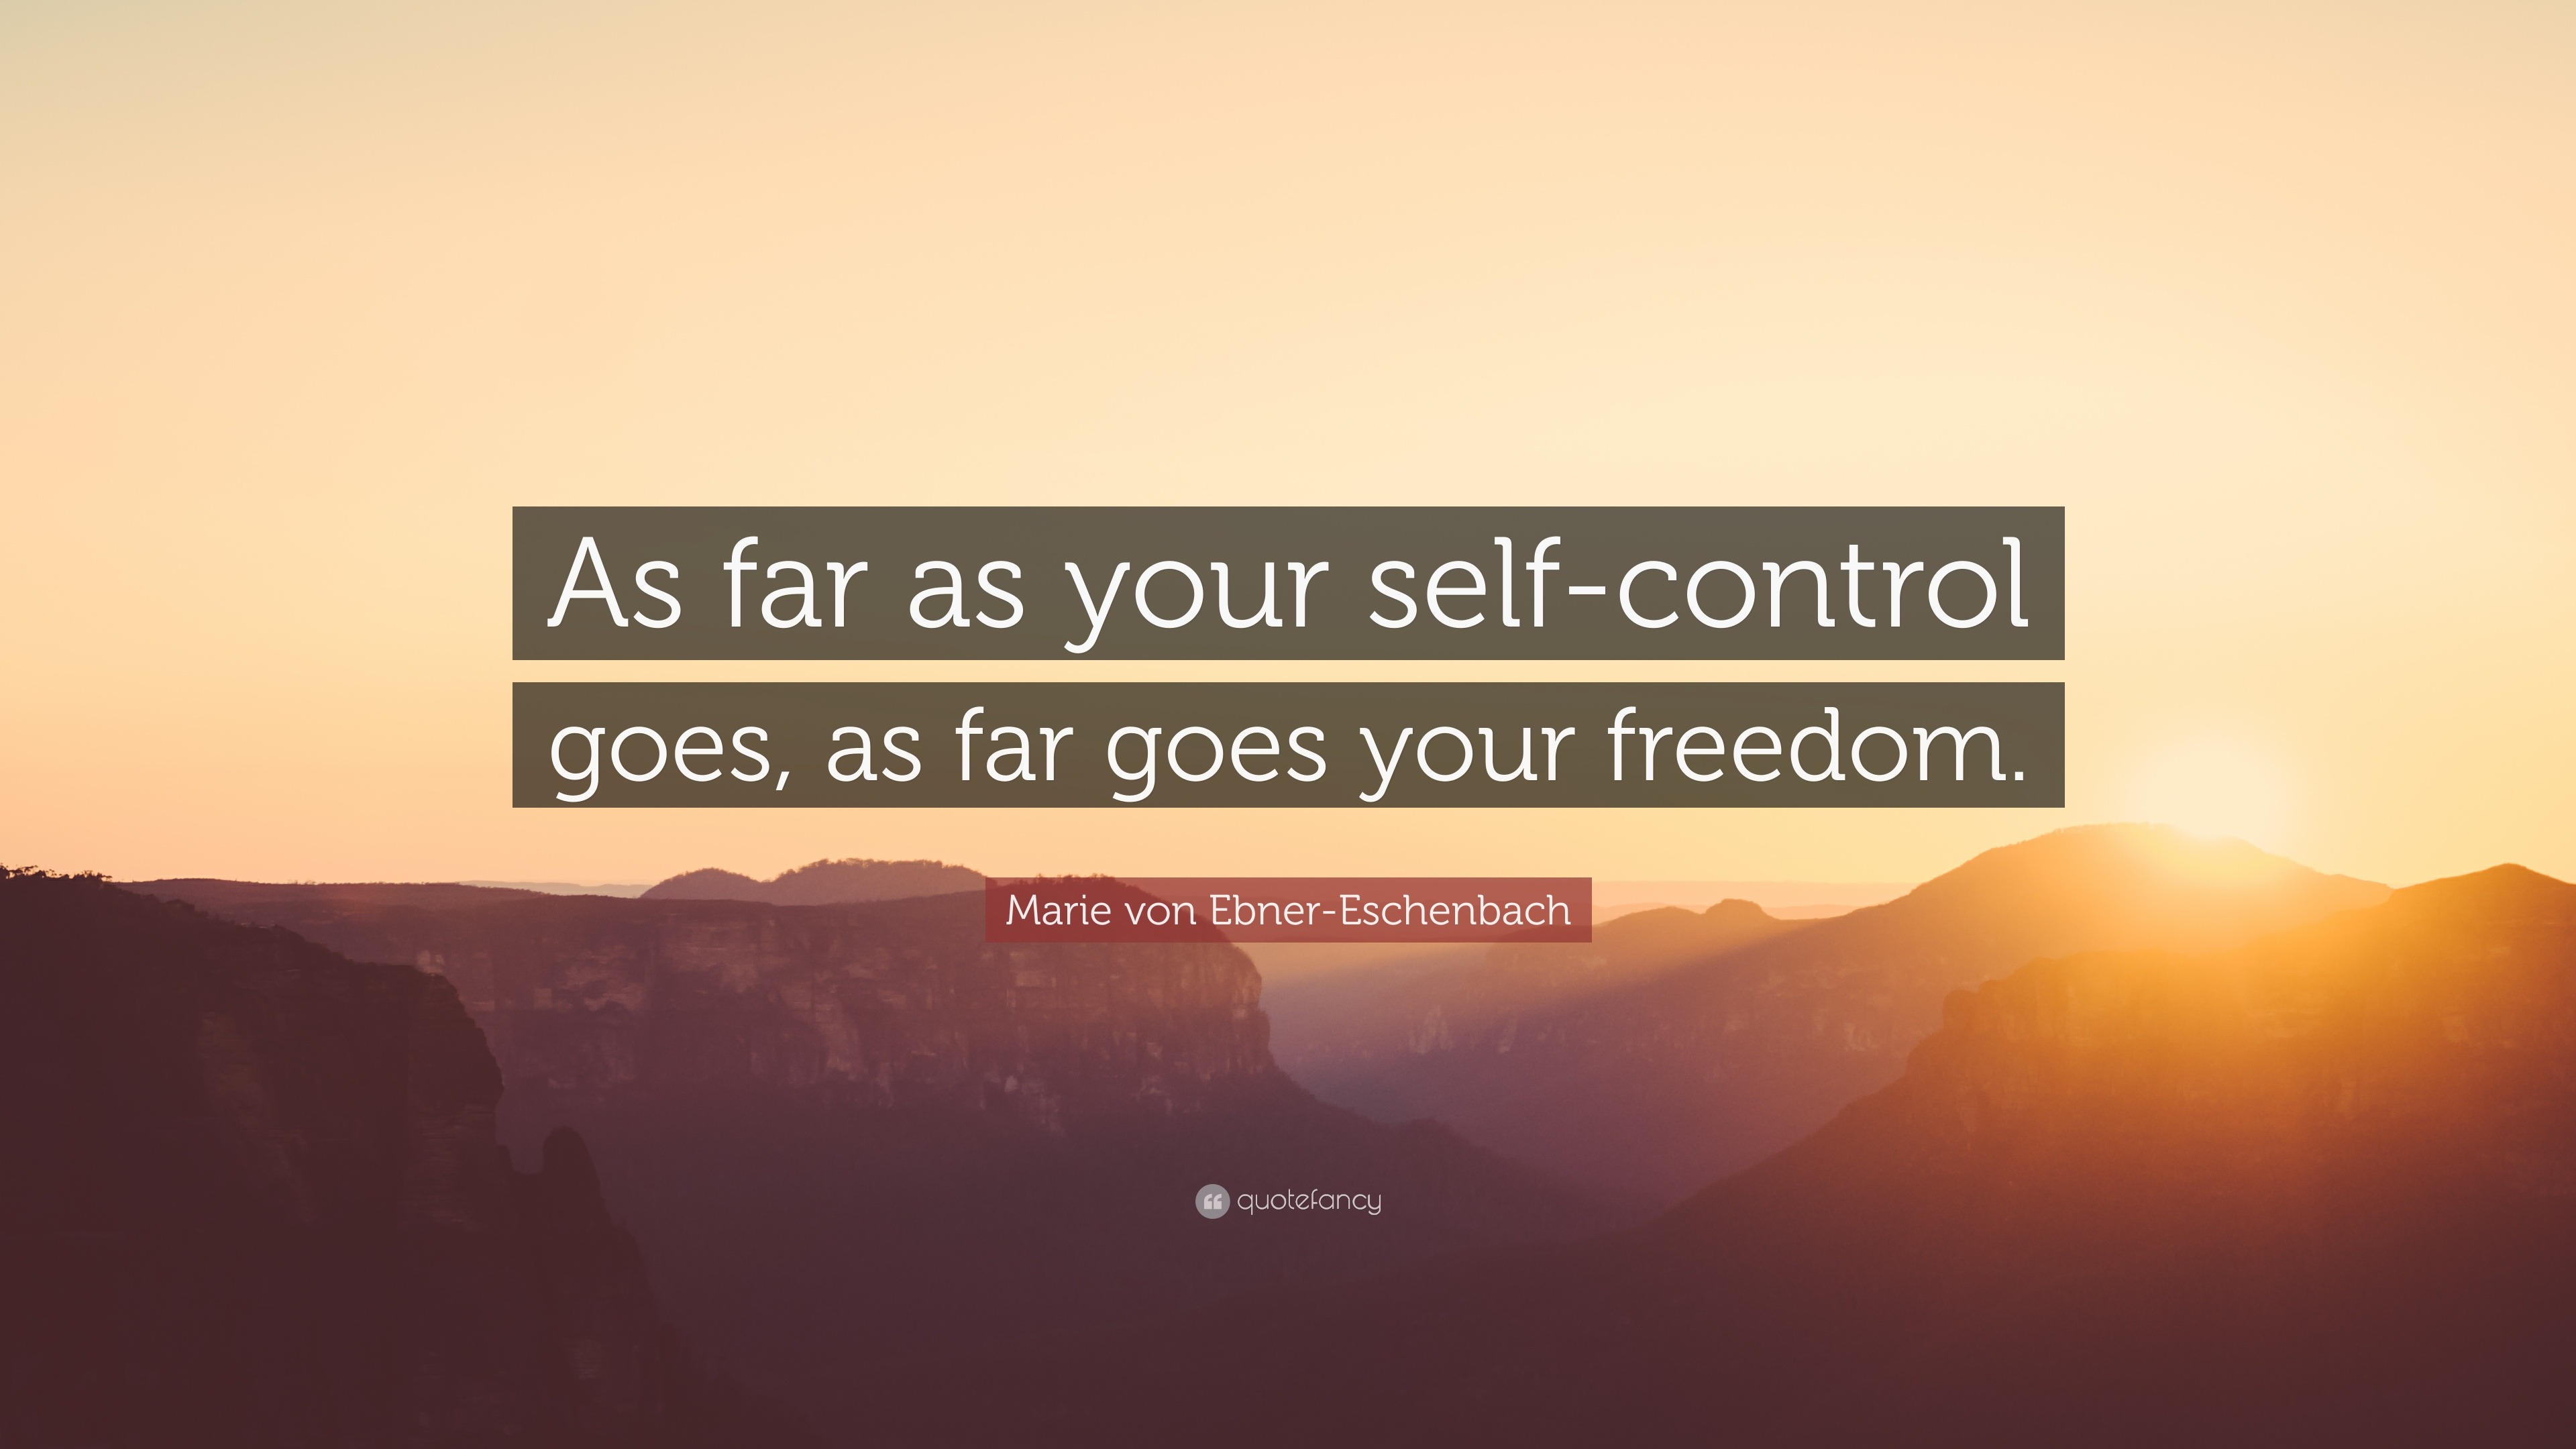 Self Control Quotes (40 wallpapers) - Quotefancy